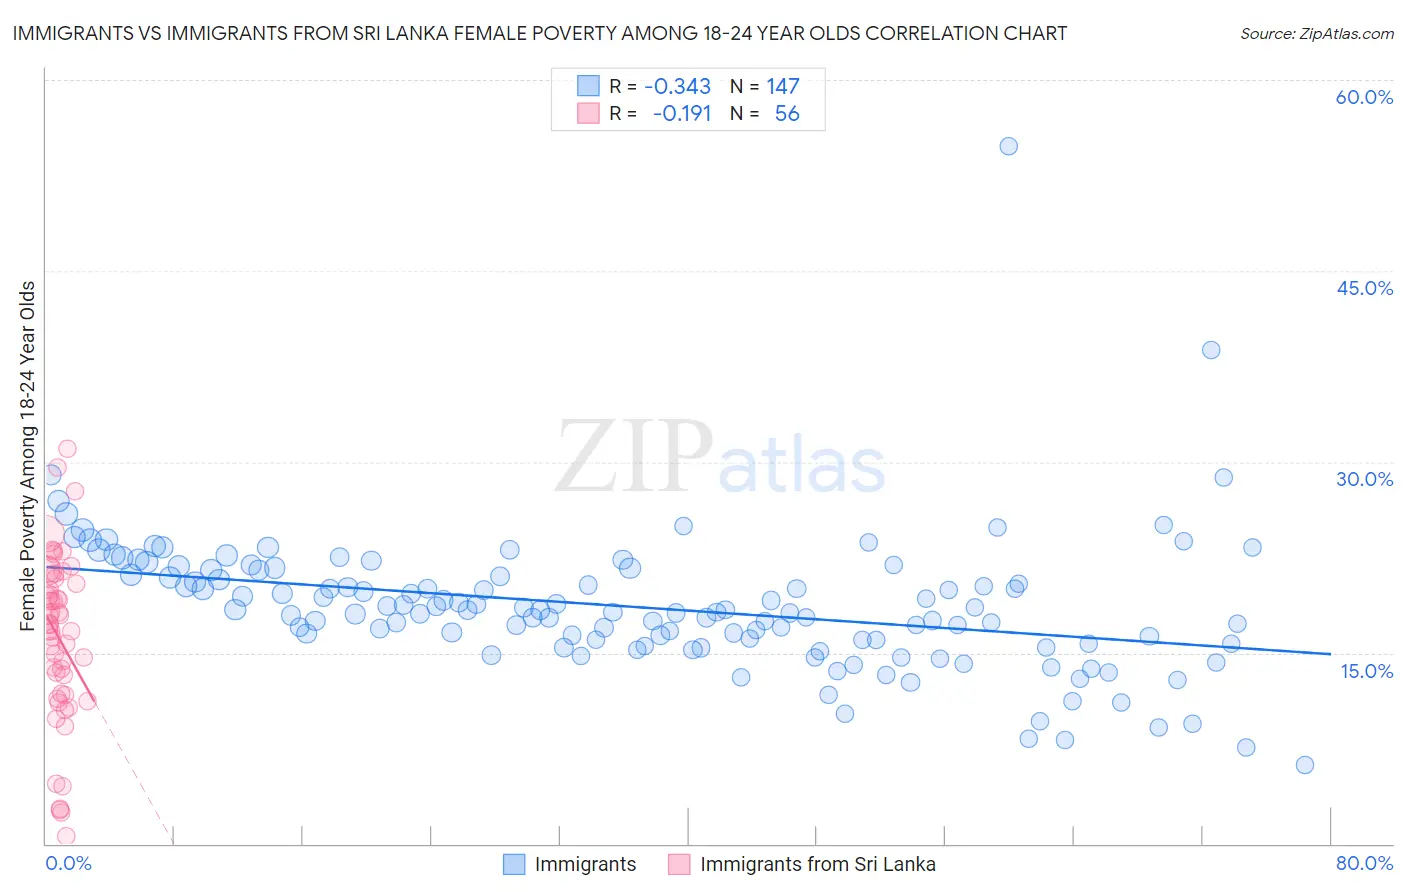 Immigrants vs Immigrants from Sri Lanka Female Poverty Among 18-24 Year Olds